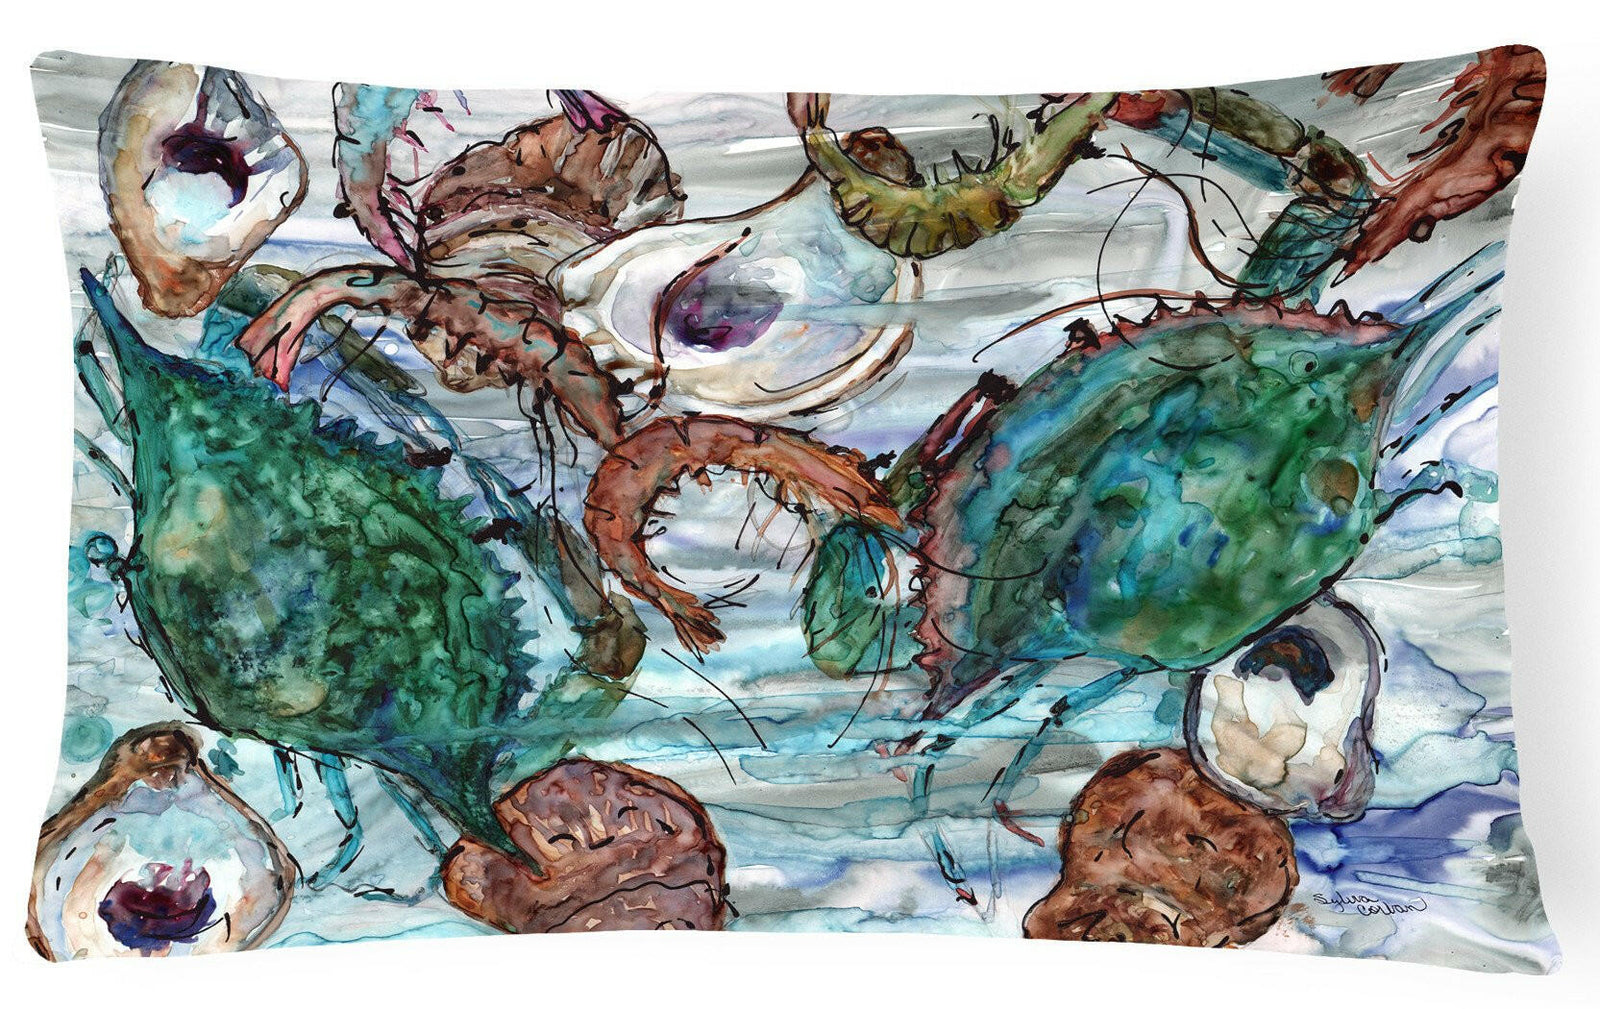 Shrimp, Crabs and Oysters in water Fabric Decorative Pillow 8965PW1216 by Caroline's Treasures